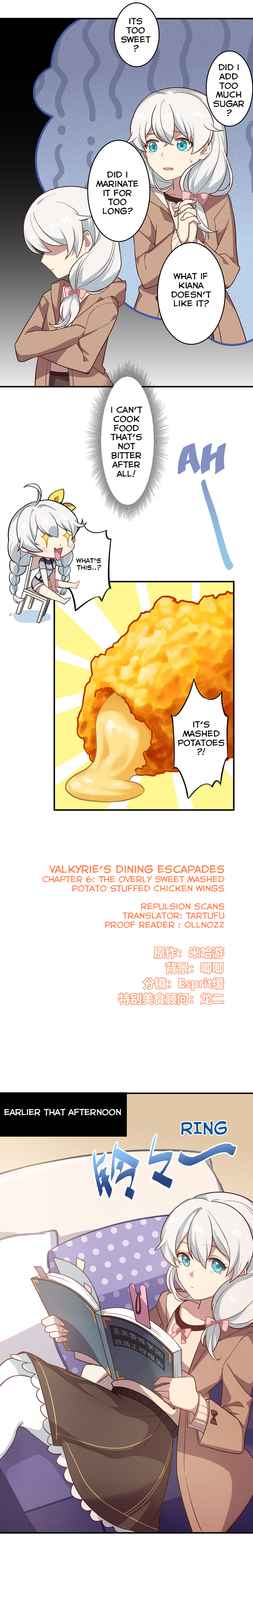 Honkai Impact 3rd Valkyries' Dining Escapades Ch. 6 The Overly Sweet Mashed Potato Stuffed Chicken Wings